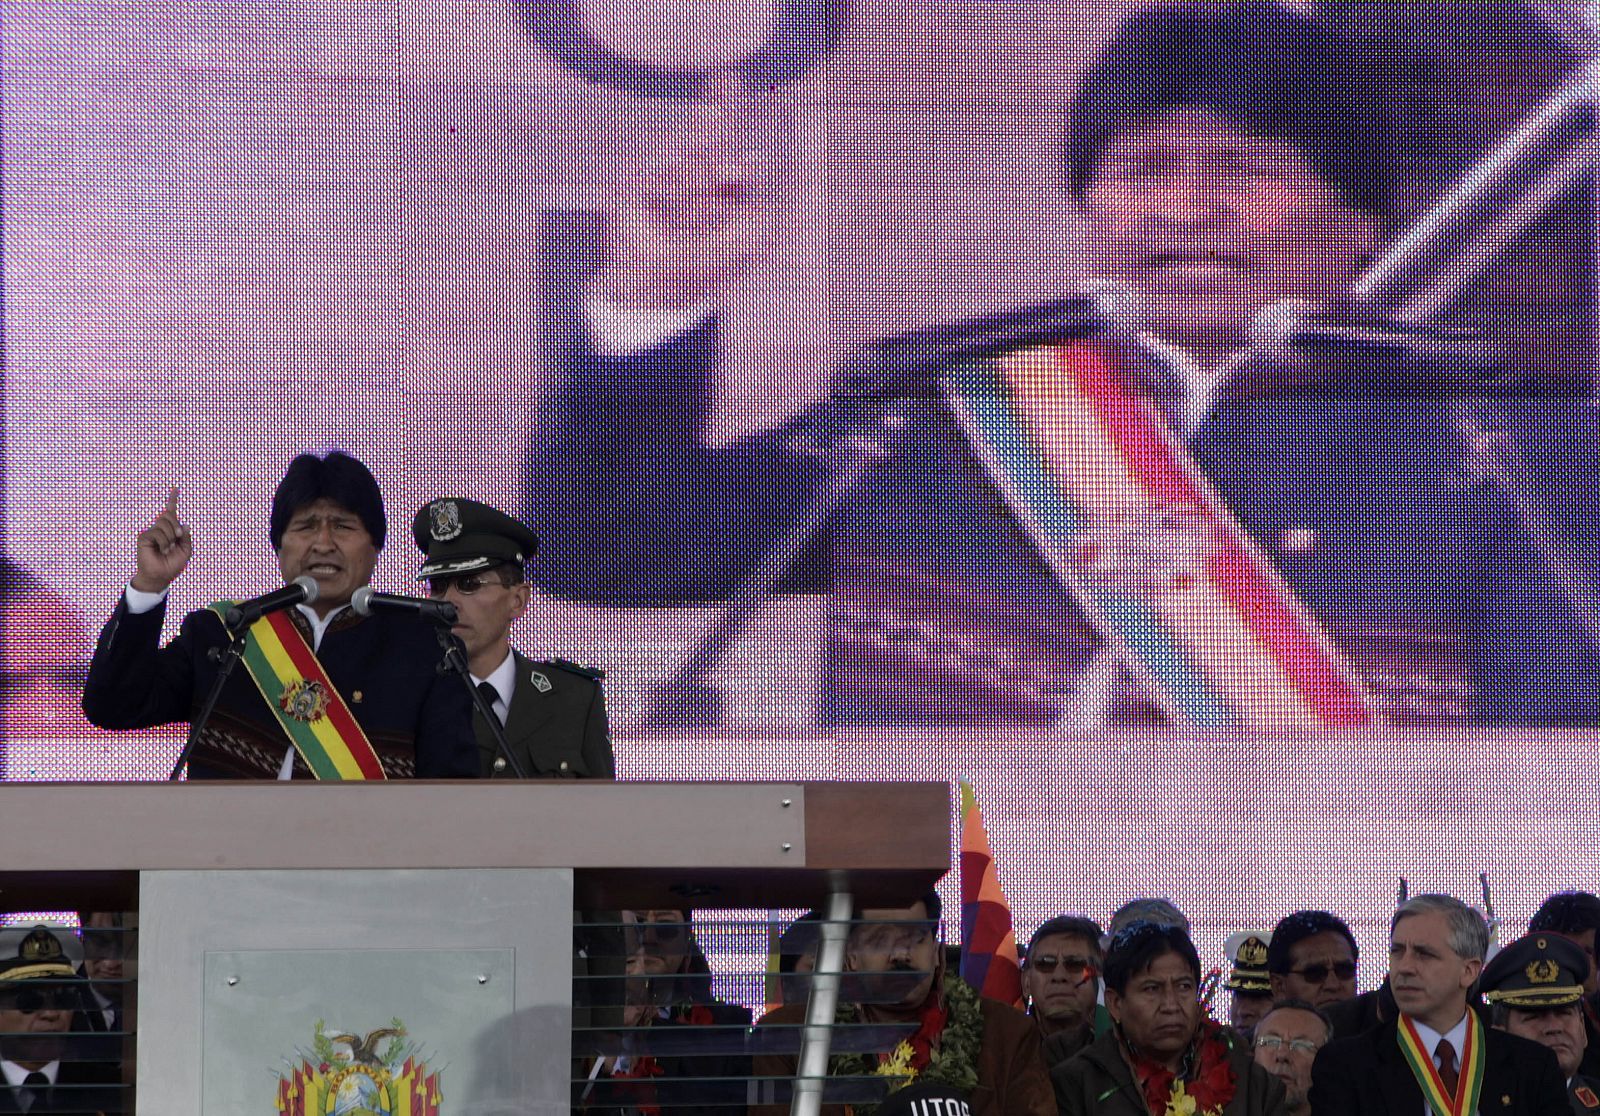 Bolivian President Evo Morales makes a speech before promulgating the new Constitution in a public gathering of his supporters in El Alto